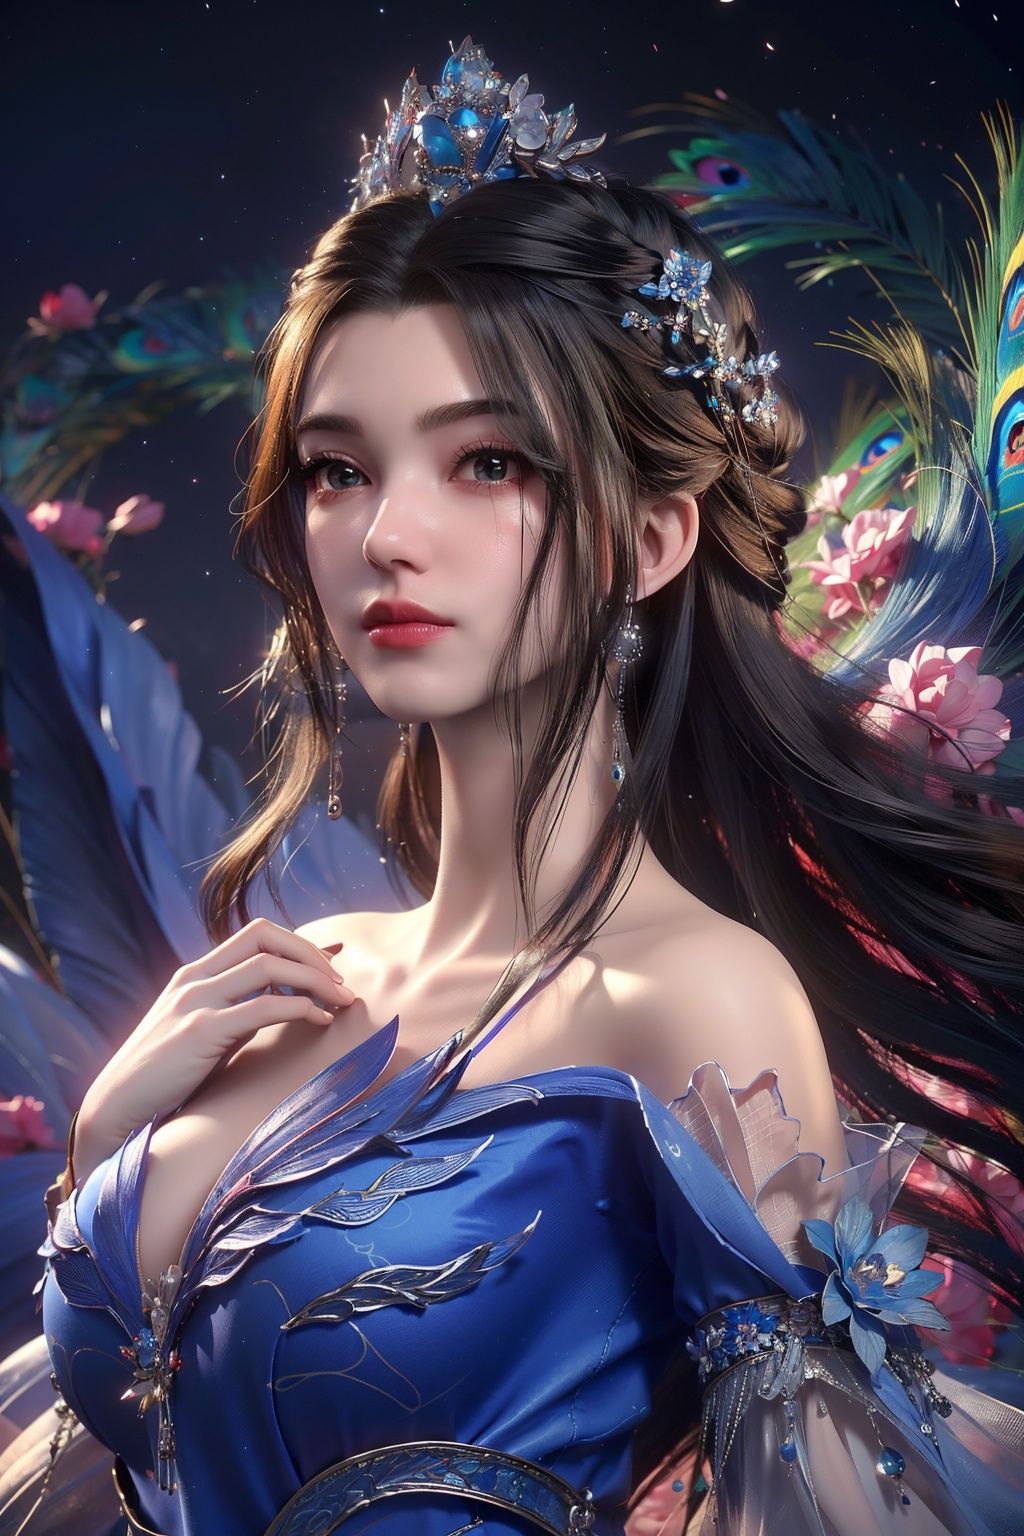  (8k, RAW photo, best quality, masterpiece:1.2),
(super realistic, photo-realistic:1.3),ultra-detailed,extremely detailed cg 8k wallpaper,hatching (texture),skin gloss,light persona,
(crystalstexture skin:1.2),(extremely delicate and beautiful),Best Quality, masterpiece, ultra-high resolution, (photo realistic: 1.4) , Surrealism, Fantastical verisimilitude, beautiful blue-skinned goddess Phoenix Peacock on her head, fantastical creation, thriller color scheme, surrealism, abstract, psychedelic, 1 girl,flower,castle,jyy-hd,1 girl,mds-hd, lmw-hd